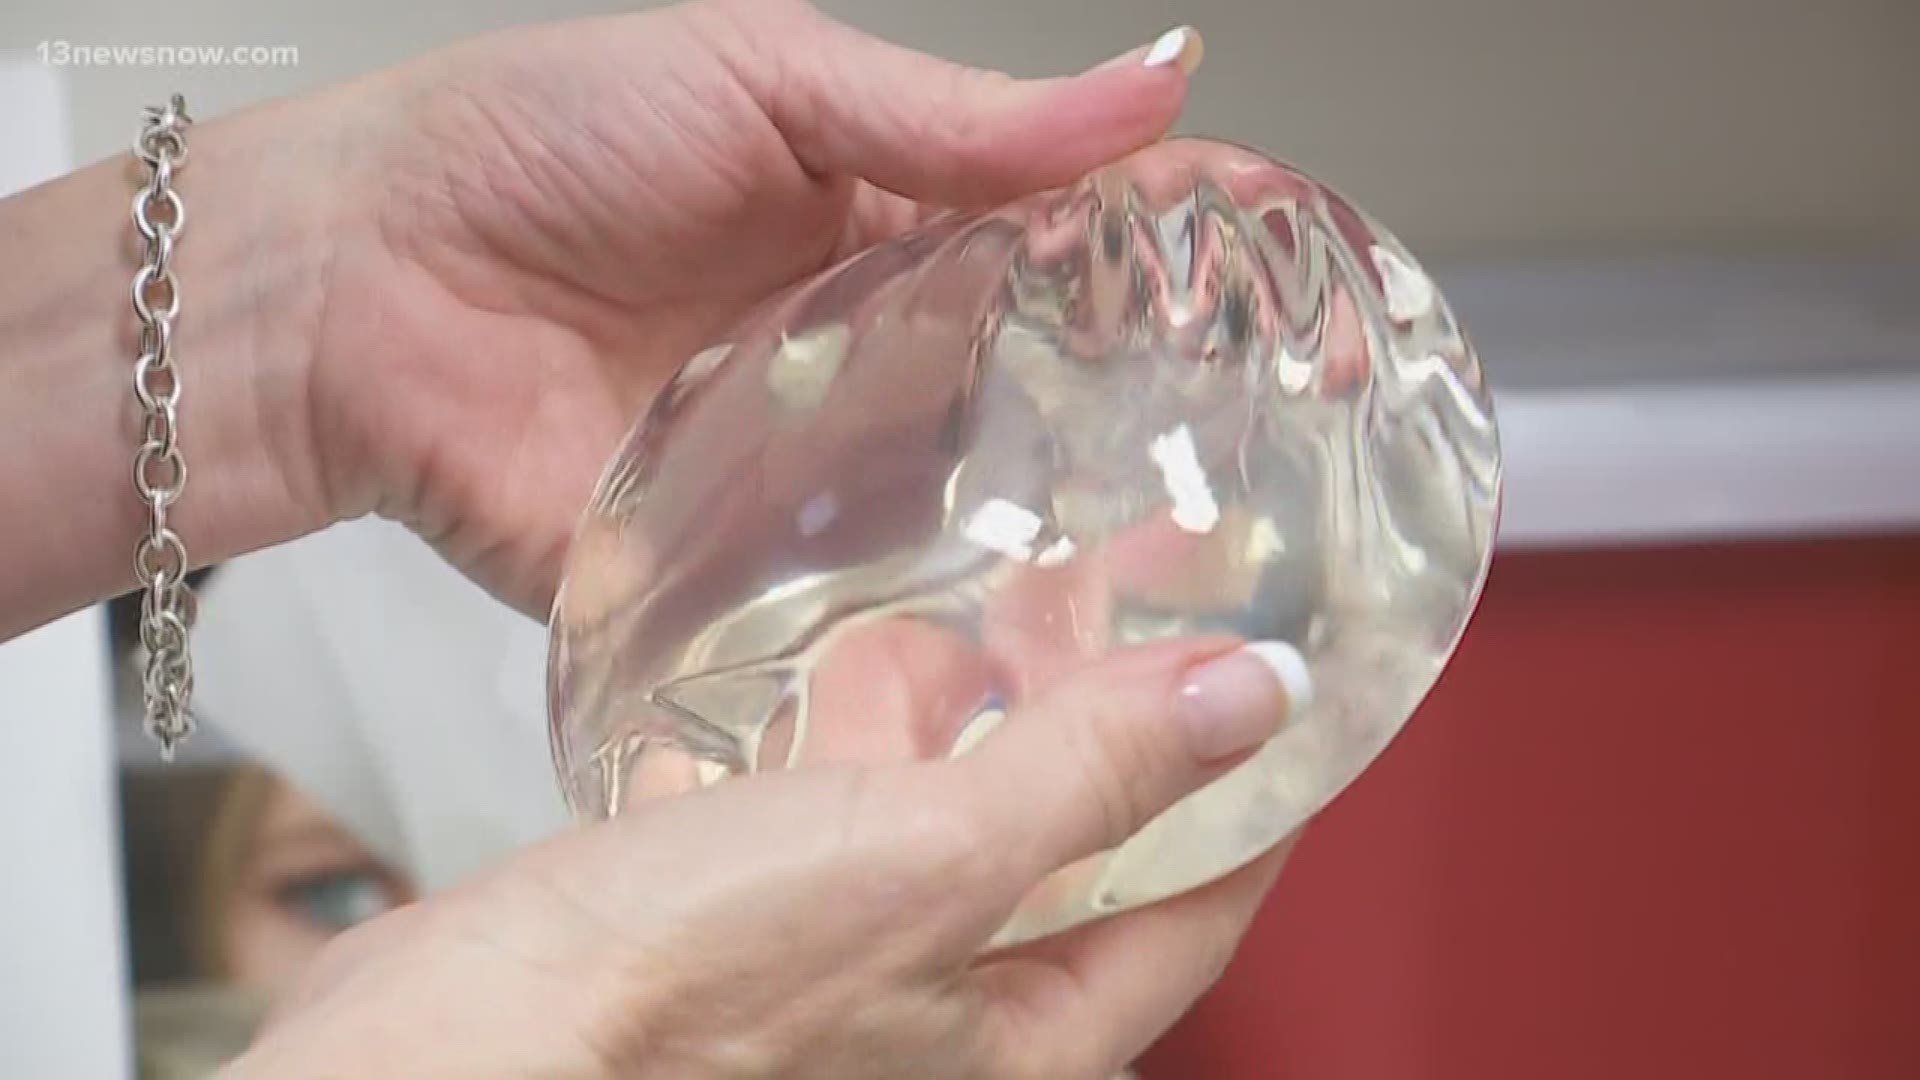 Doctors Warn About Rare Cancer Associated With Textured Breast Implants 